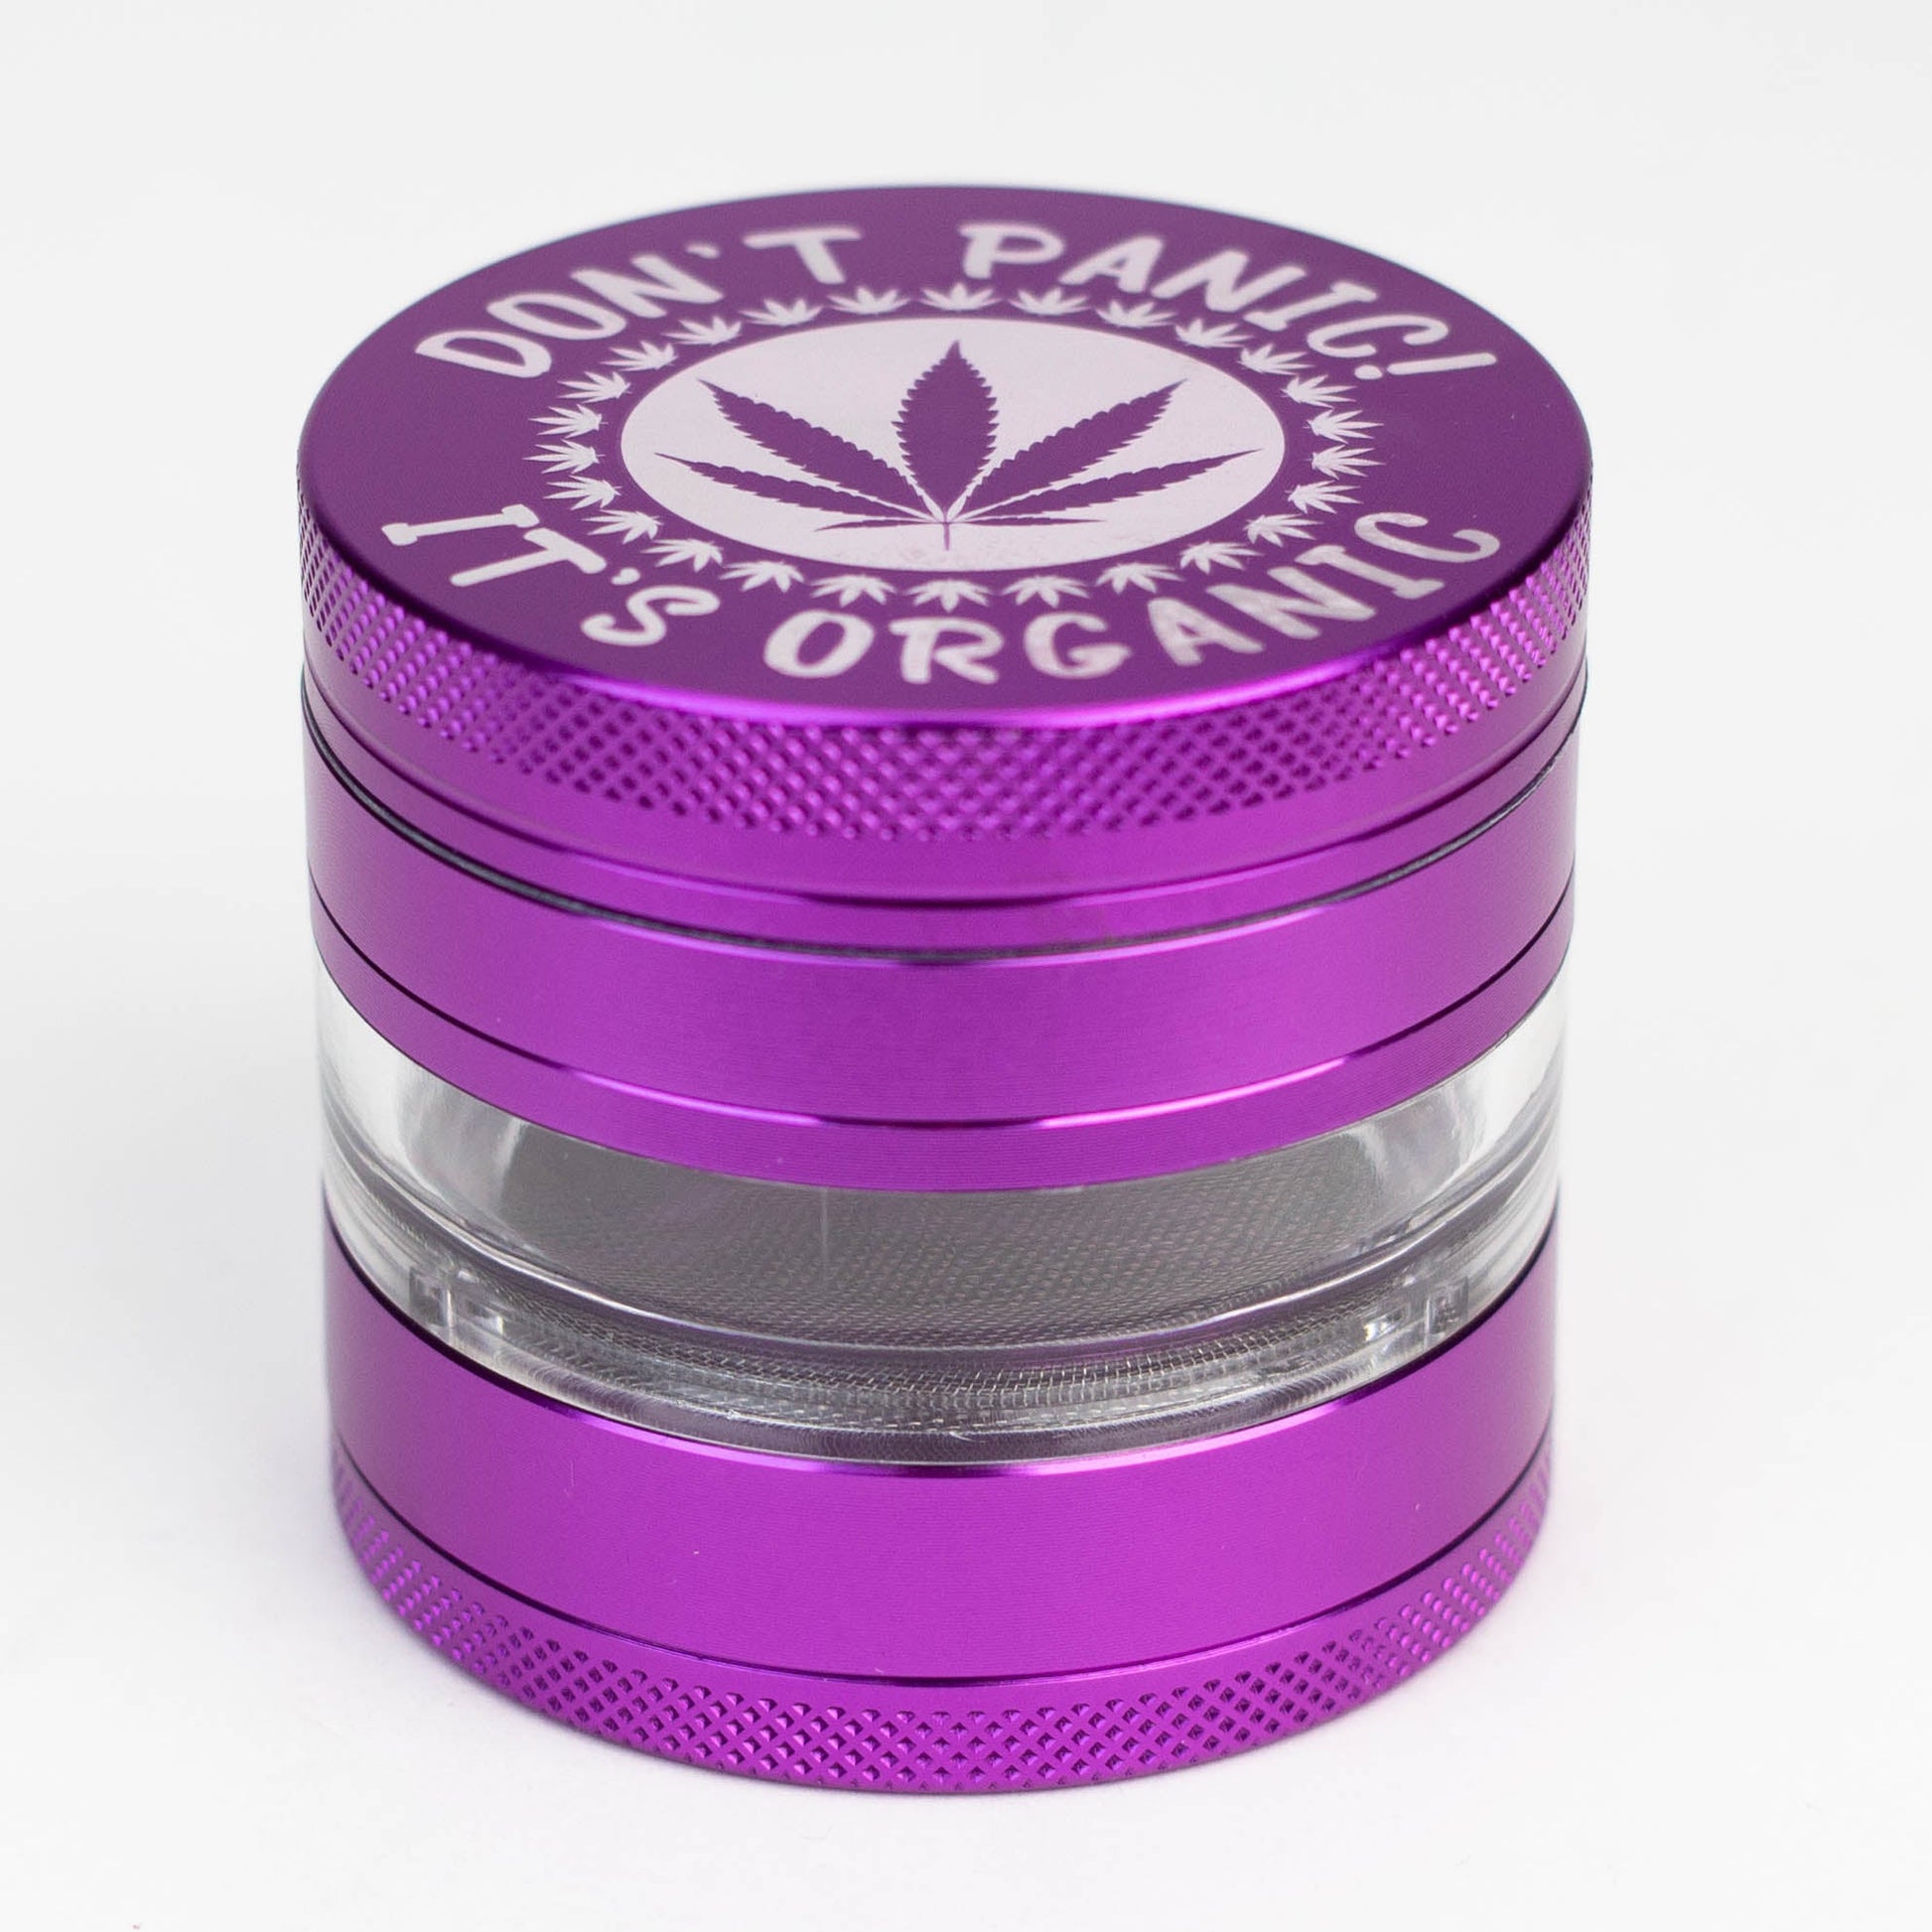 Heavy Duty Large "Don't Panic It's Organic" 4 Parts Weed Grinder Engraved in Canada_15